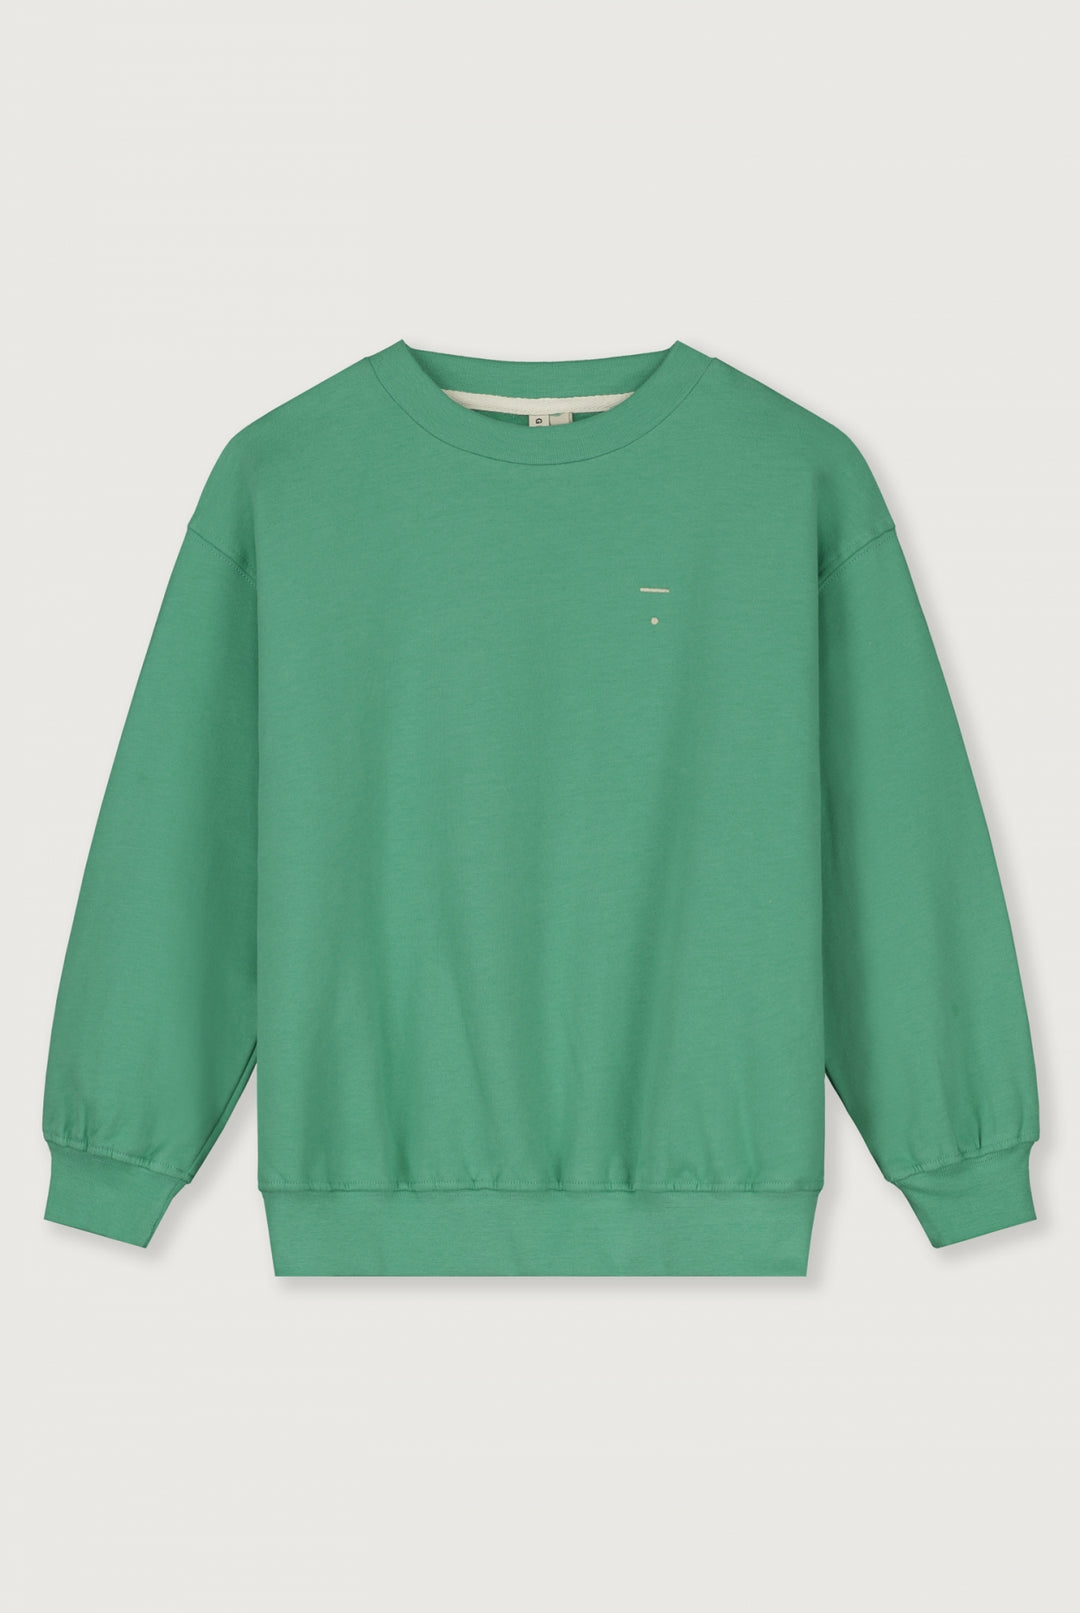 Dropped Shoulder Sweater, Bright Green